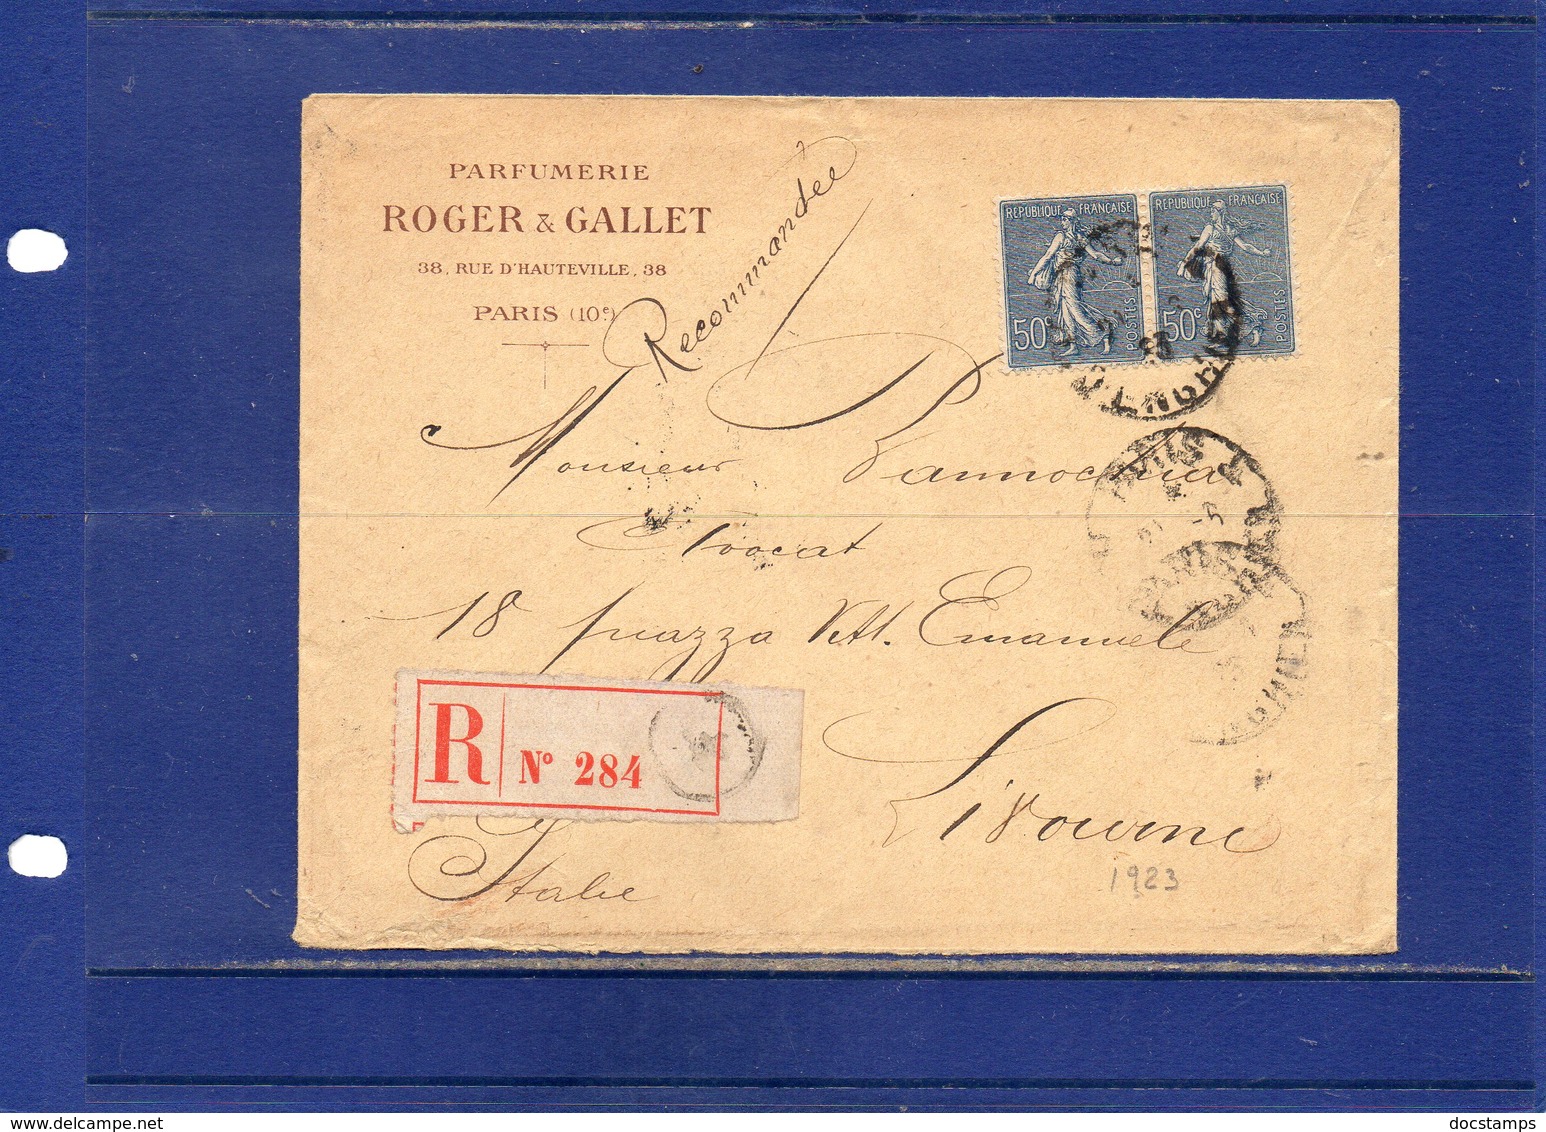 ##(ROYBOX1)Postal History-France1923-Perfume-Parfum-Roger&Gallet Parfumerie Registered Cover From Paris To Livorno-Italy - Non Classificati